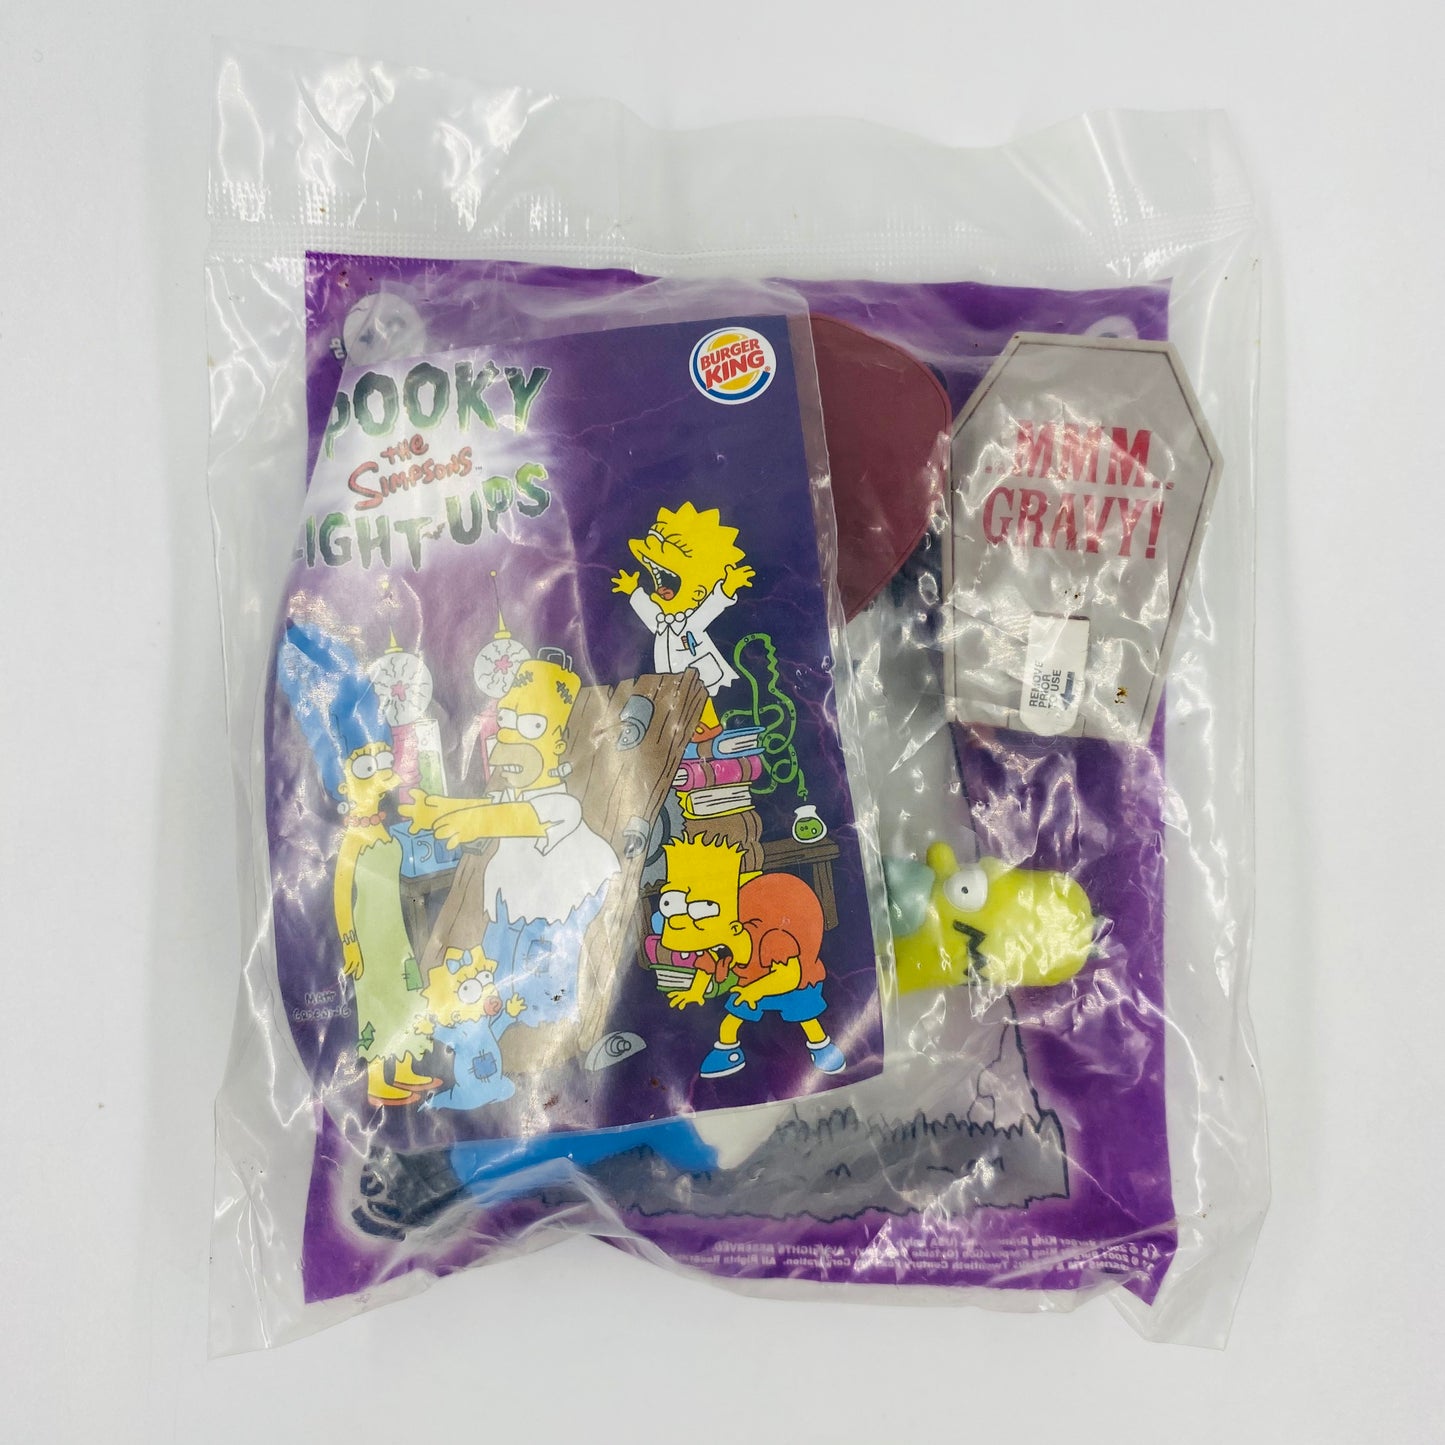 The Simpsons Spooky Light-Ups Homer Simpson Burger King Kids' Meals toy (2001) bagged